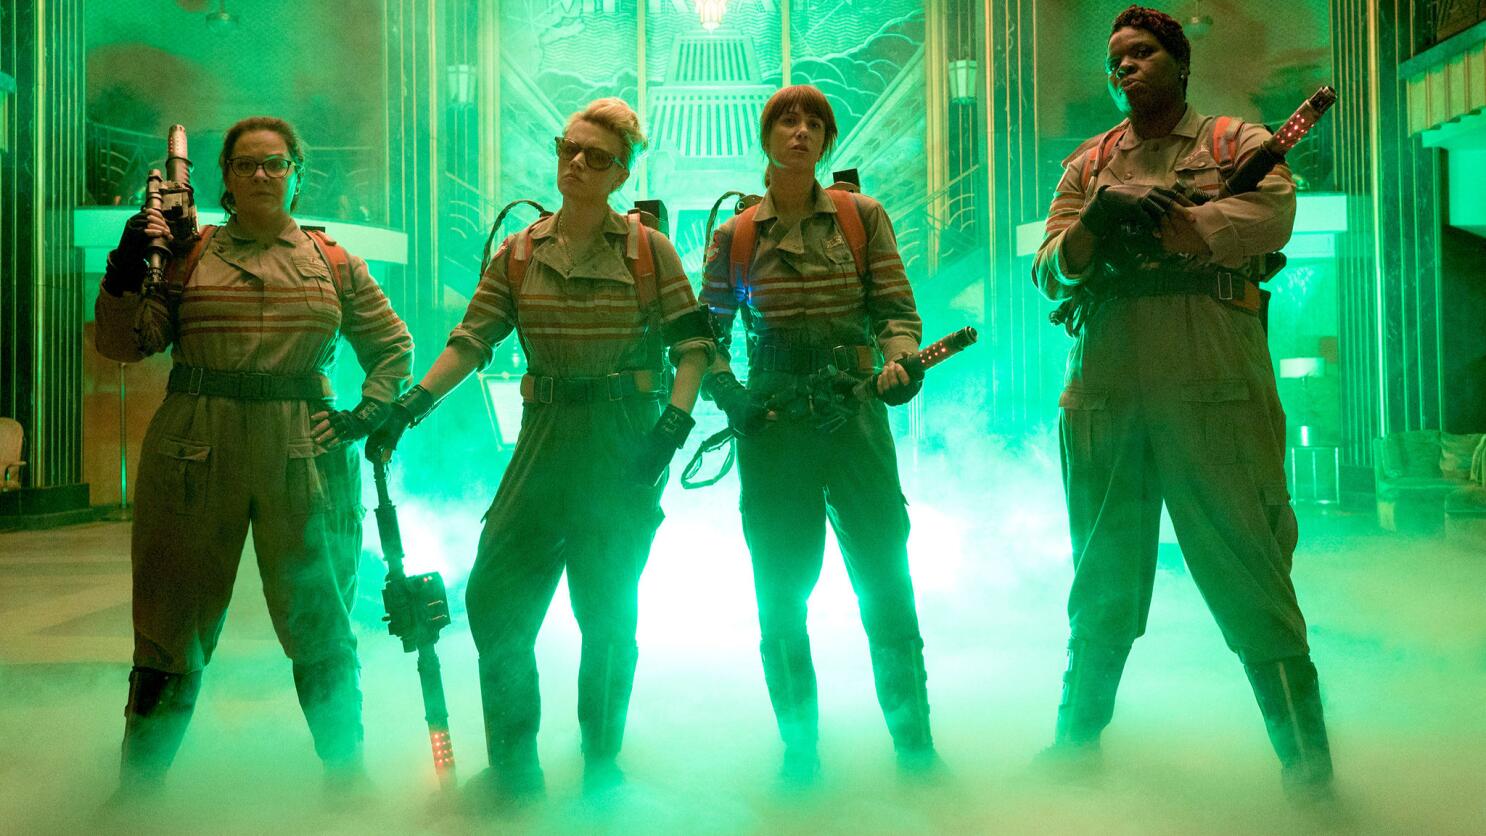 Ghostbusters: Afterlife' exceeds box office expectations - Los Angeles Times